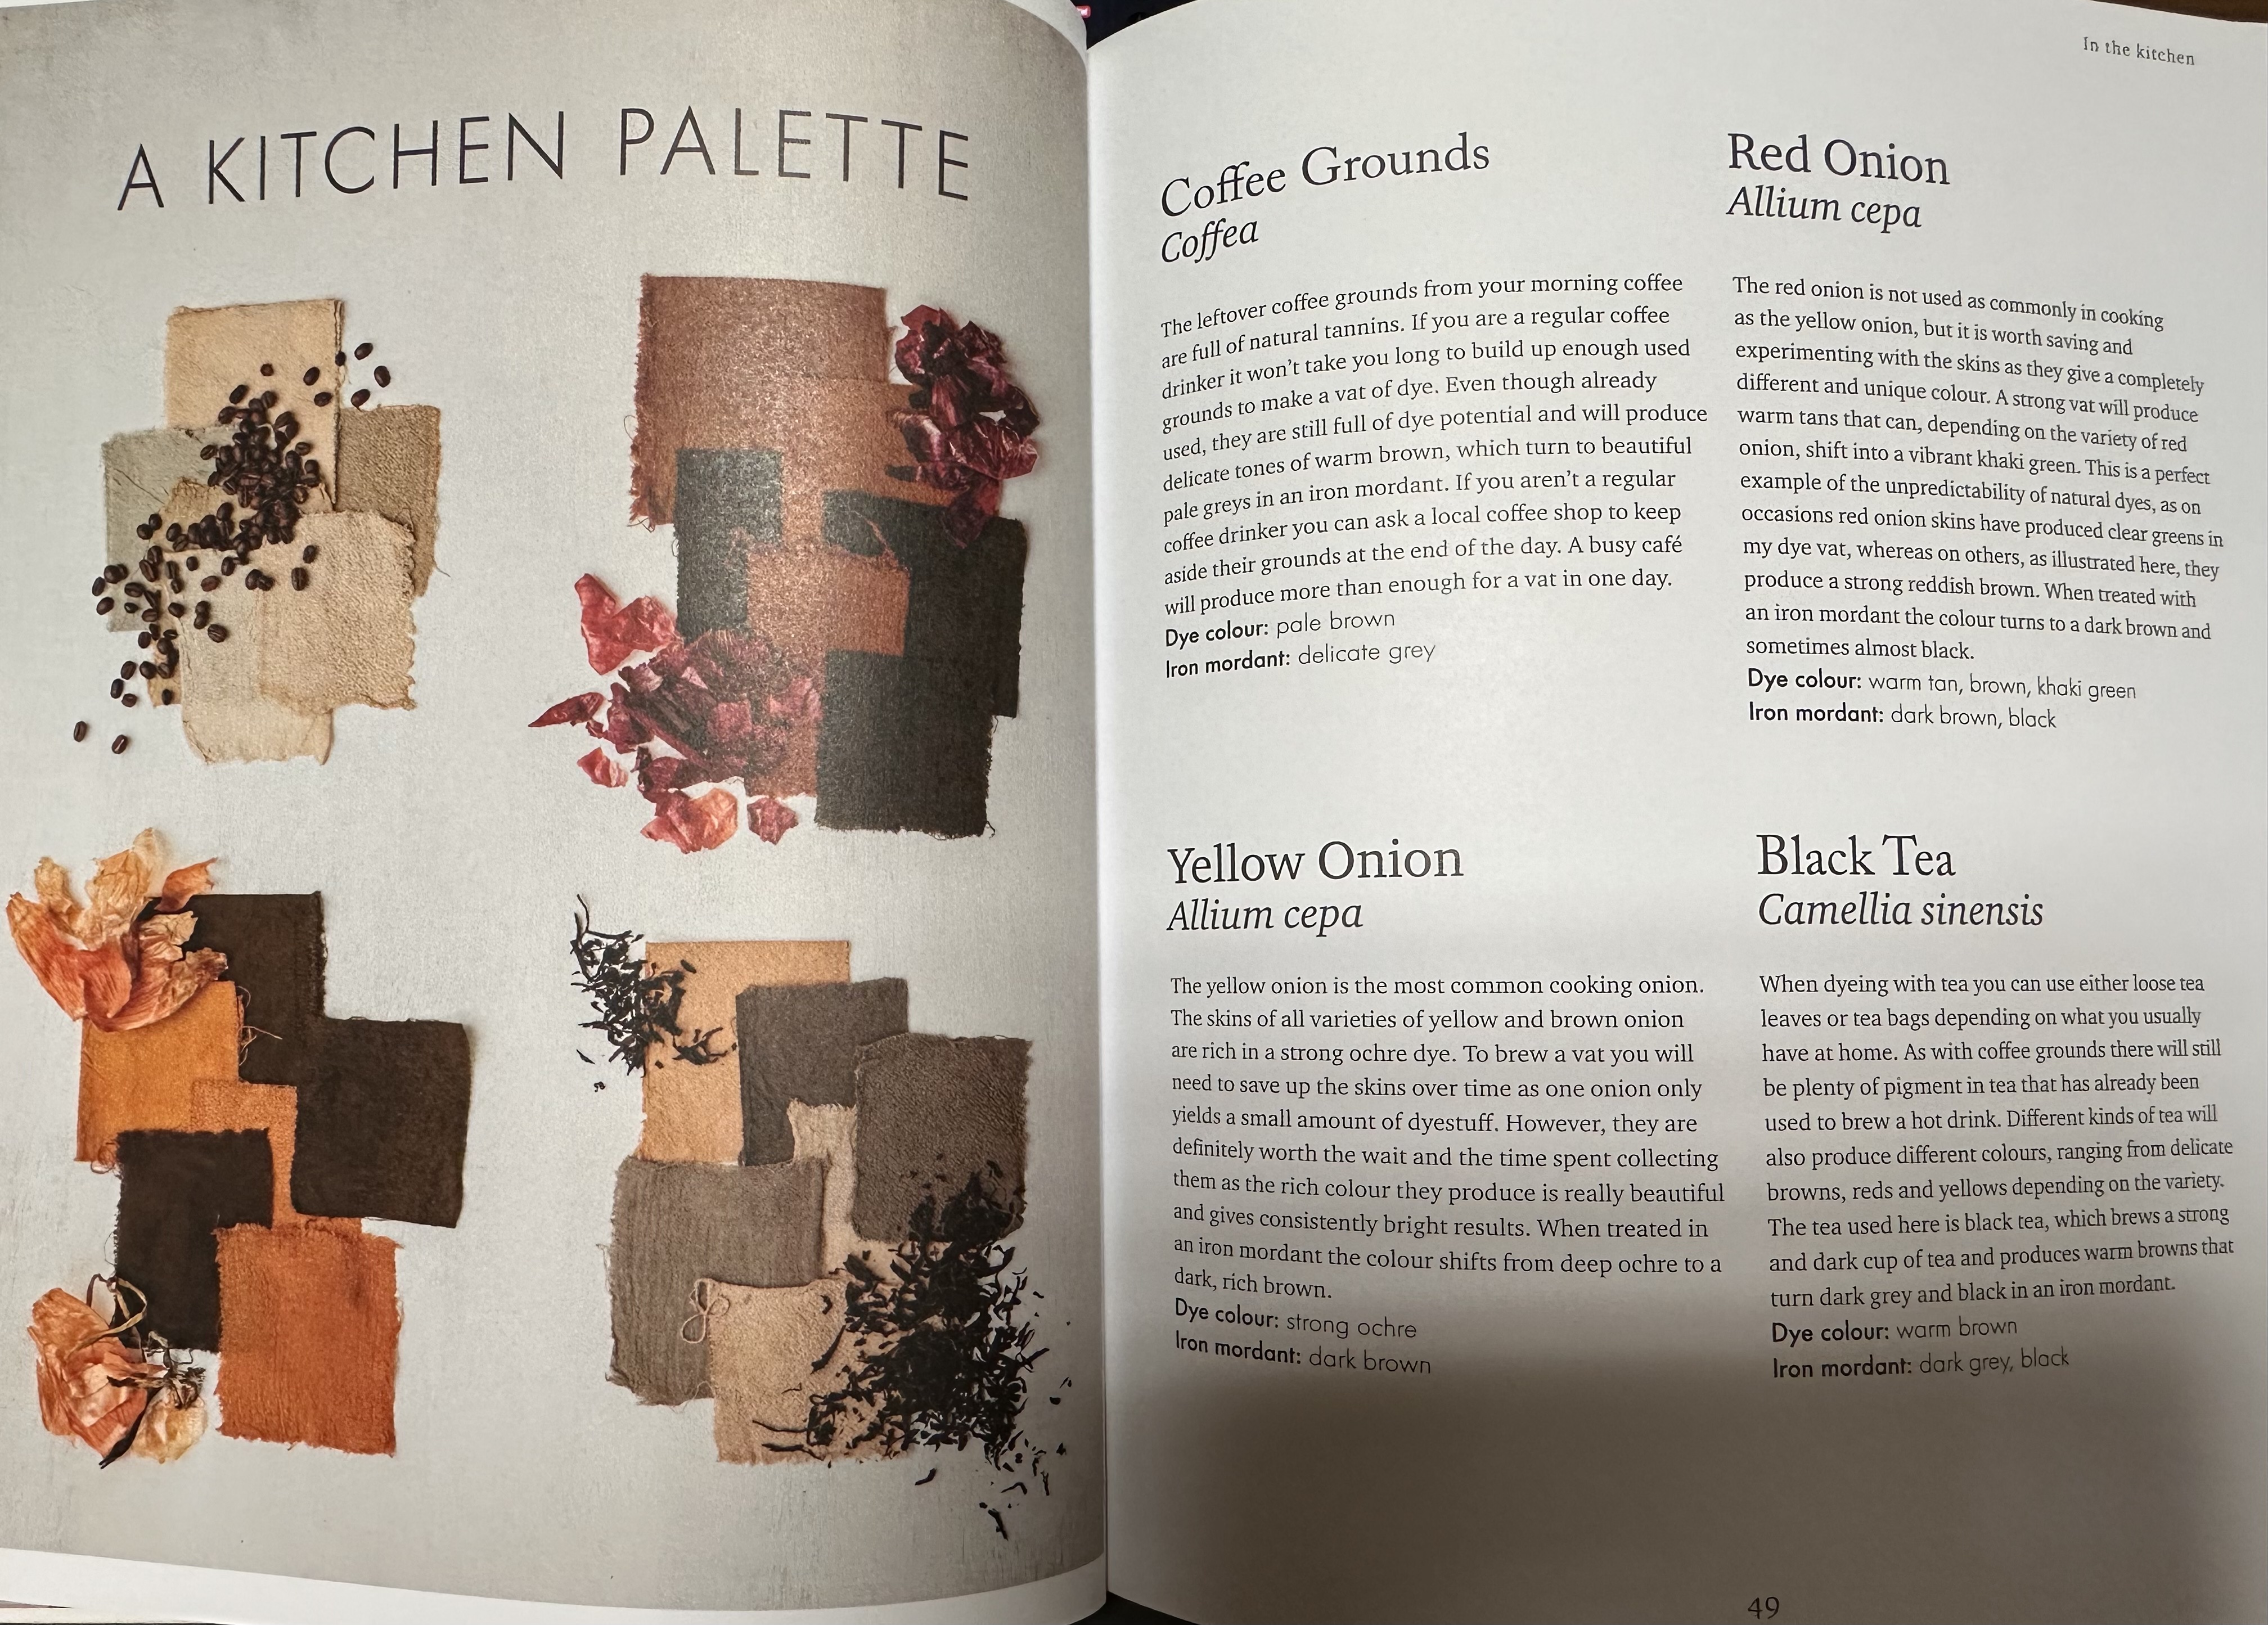 A photo of two pages from inside the book 'The Wild Dyer'. The pages show swatches of fabric dyed in several shades of brown.